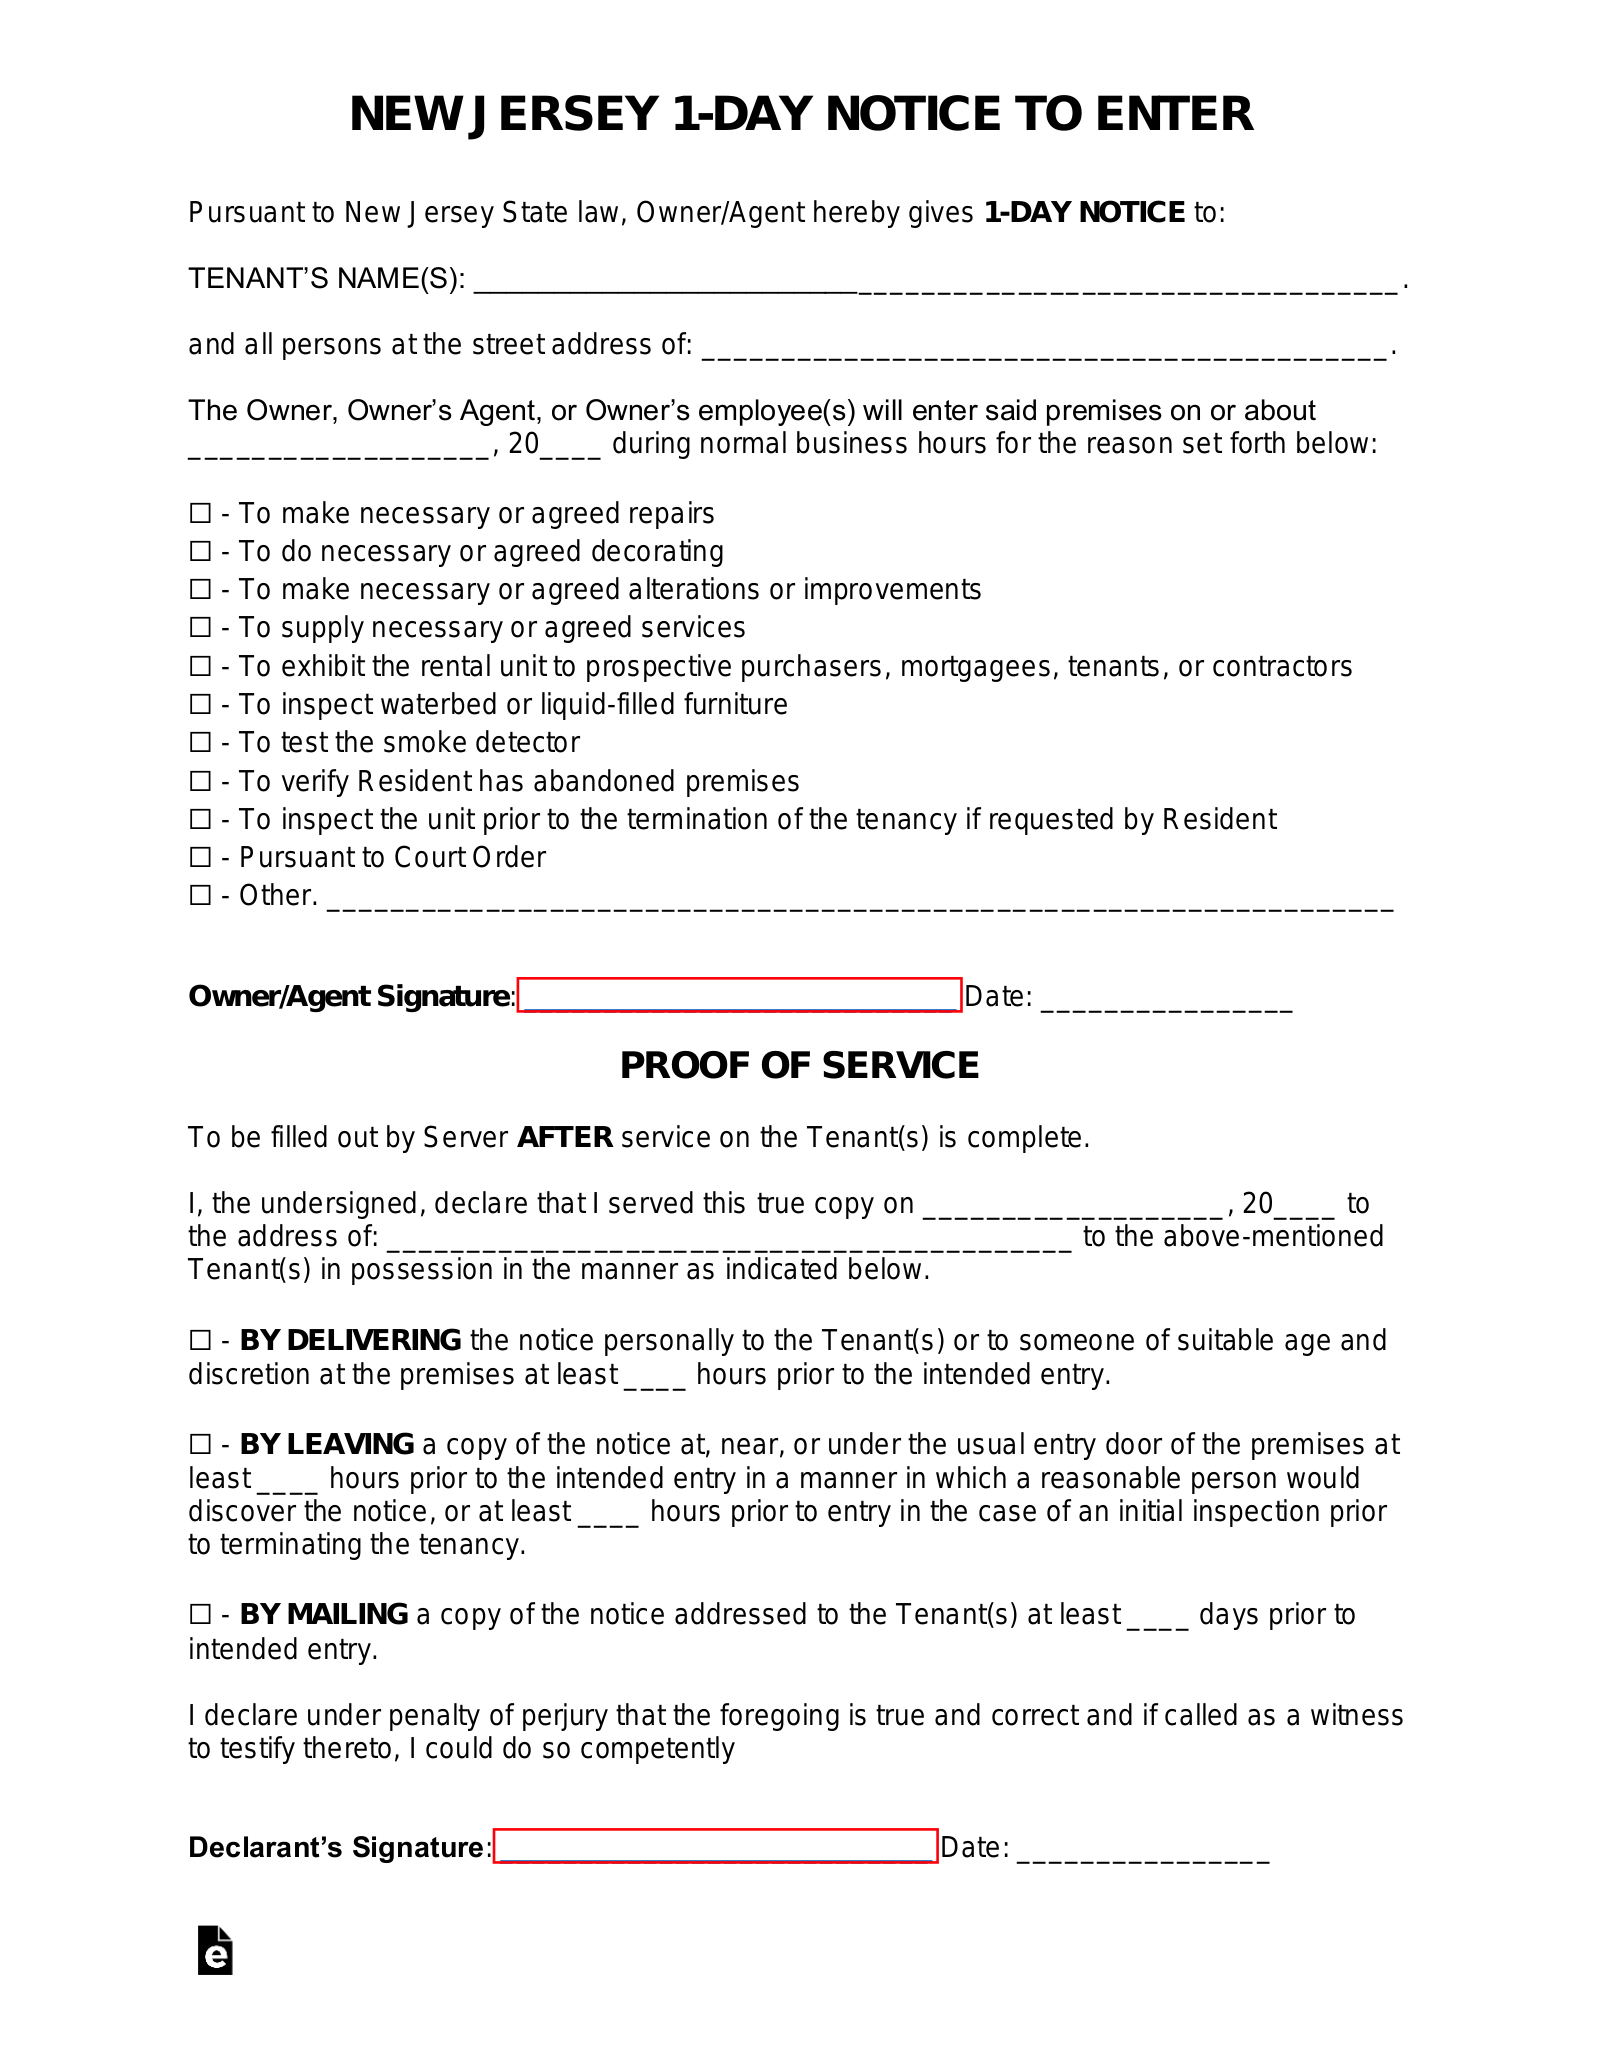 New Jersey Landlord 1-Day Notice to Enter Form